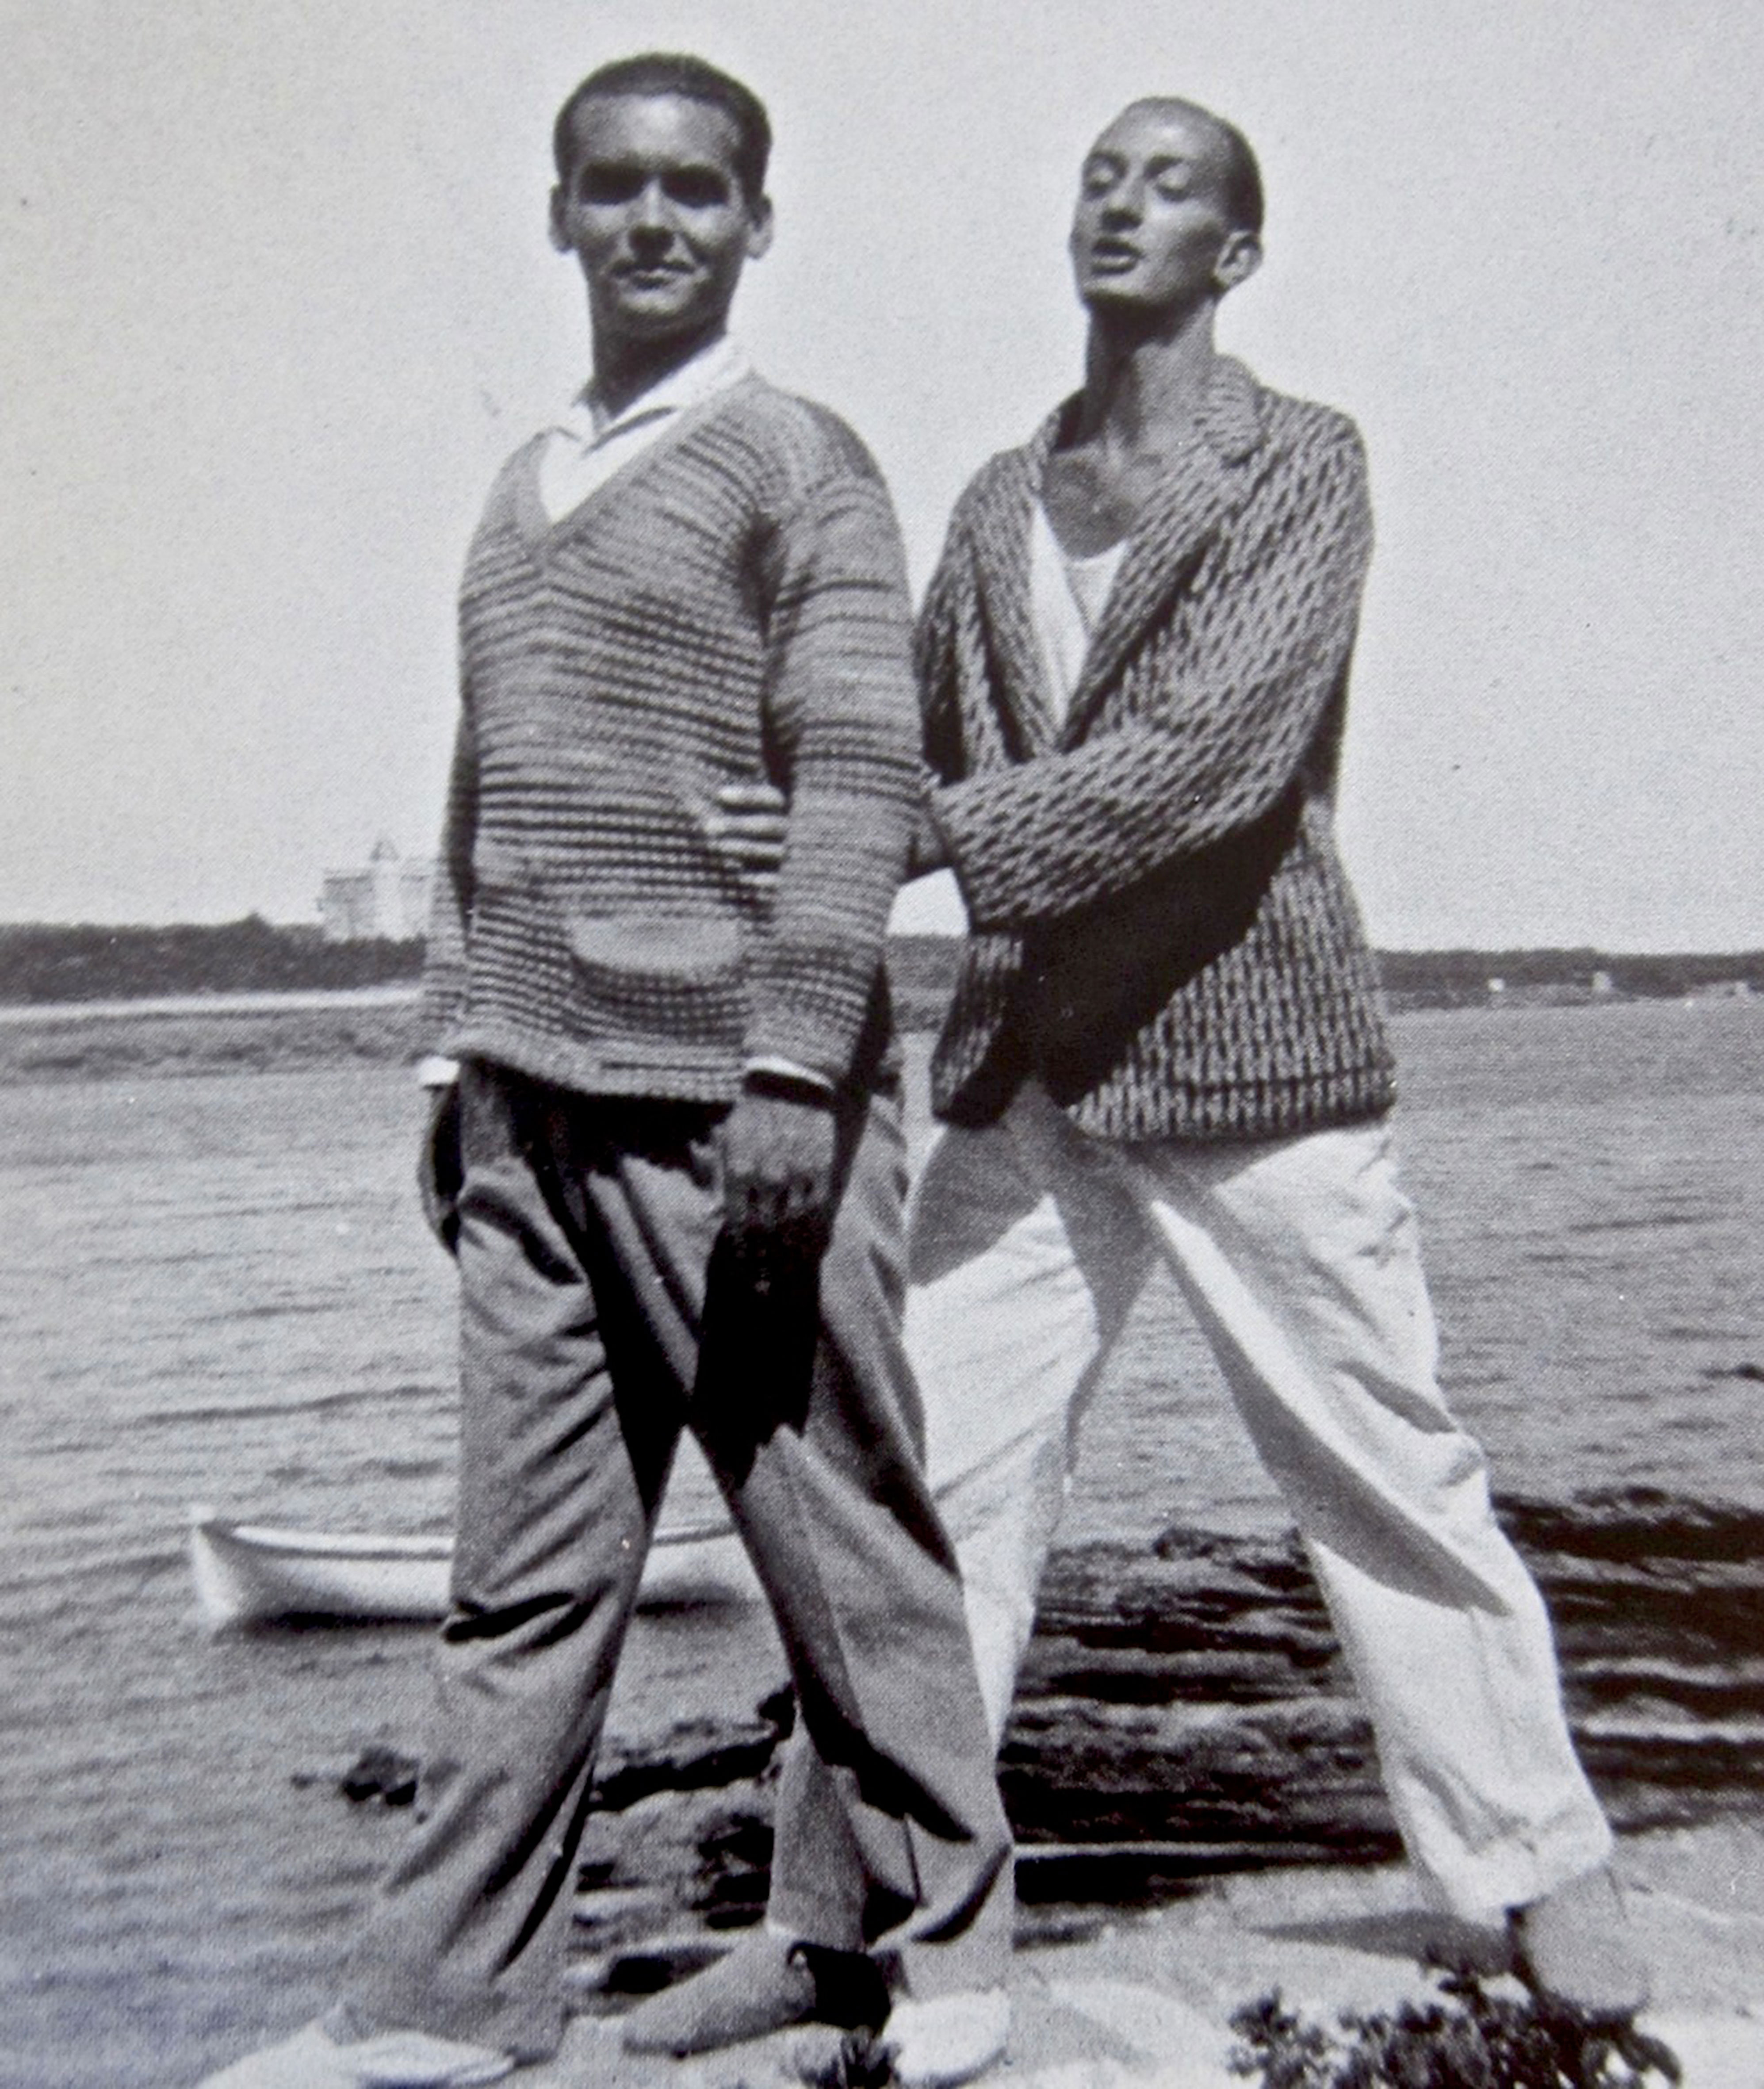 Сальвадор Дали и Фредерико Гарсиа Лорка в Salvador Dalí and Federico García Lorca in Cadaqués. Found in the Collection of Fundació Gala - Salvador Dali, Figueres. (Photo by Fine Art Images/Heritage Images/Getty Images)